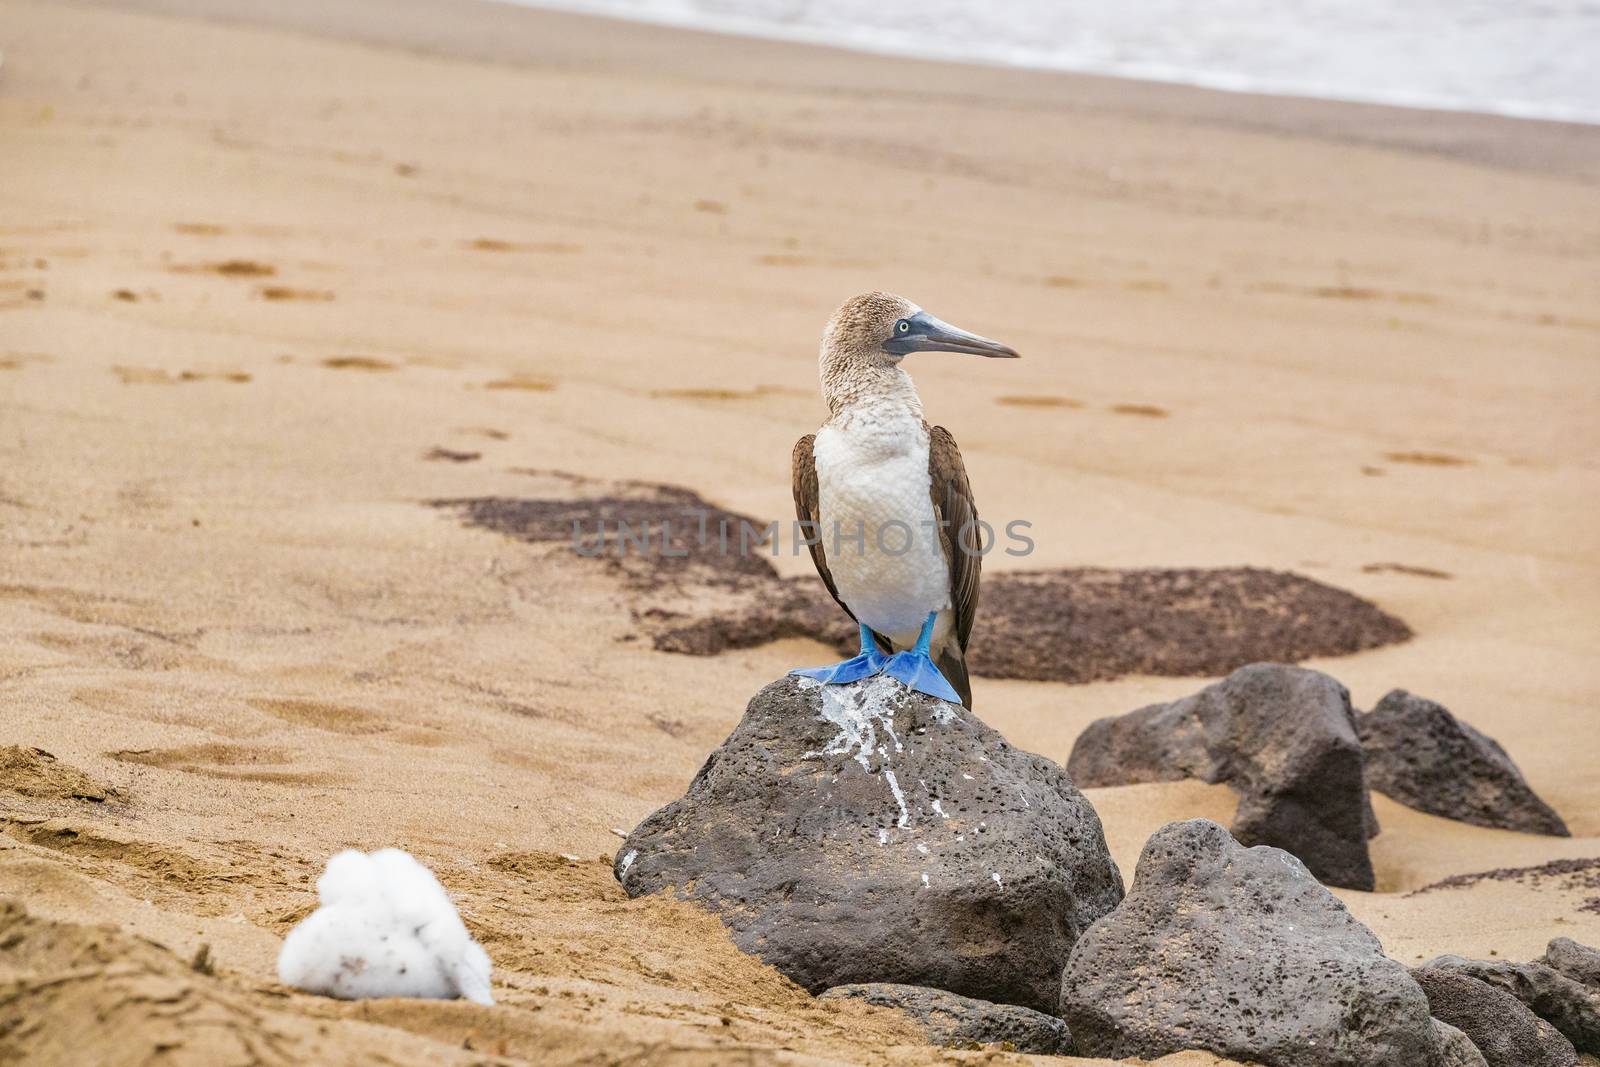 Galapagos animals: Blue-footed Booby - Iconic famous galapagos wildlife by Maridav